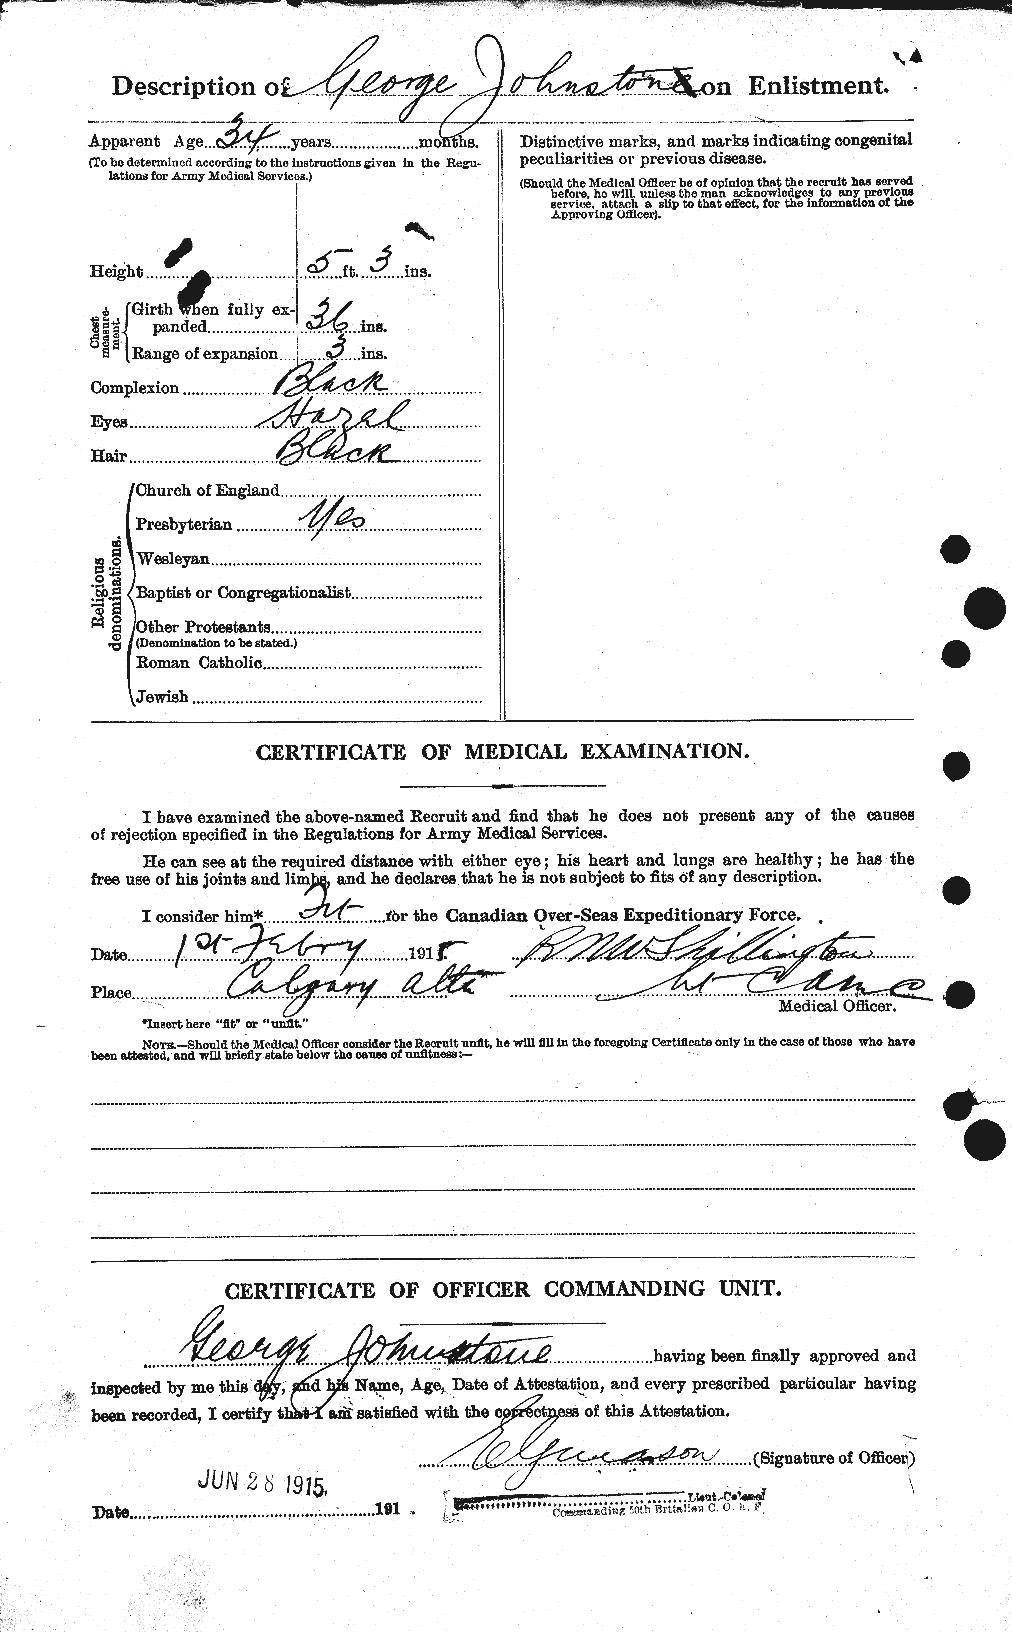 Personnel Records of the First World War - CEF 424096b